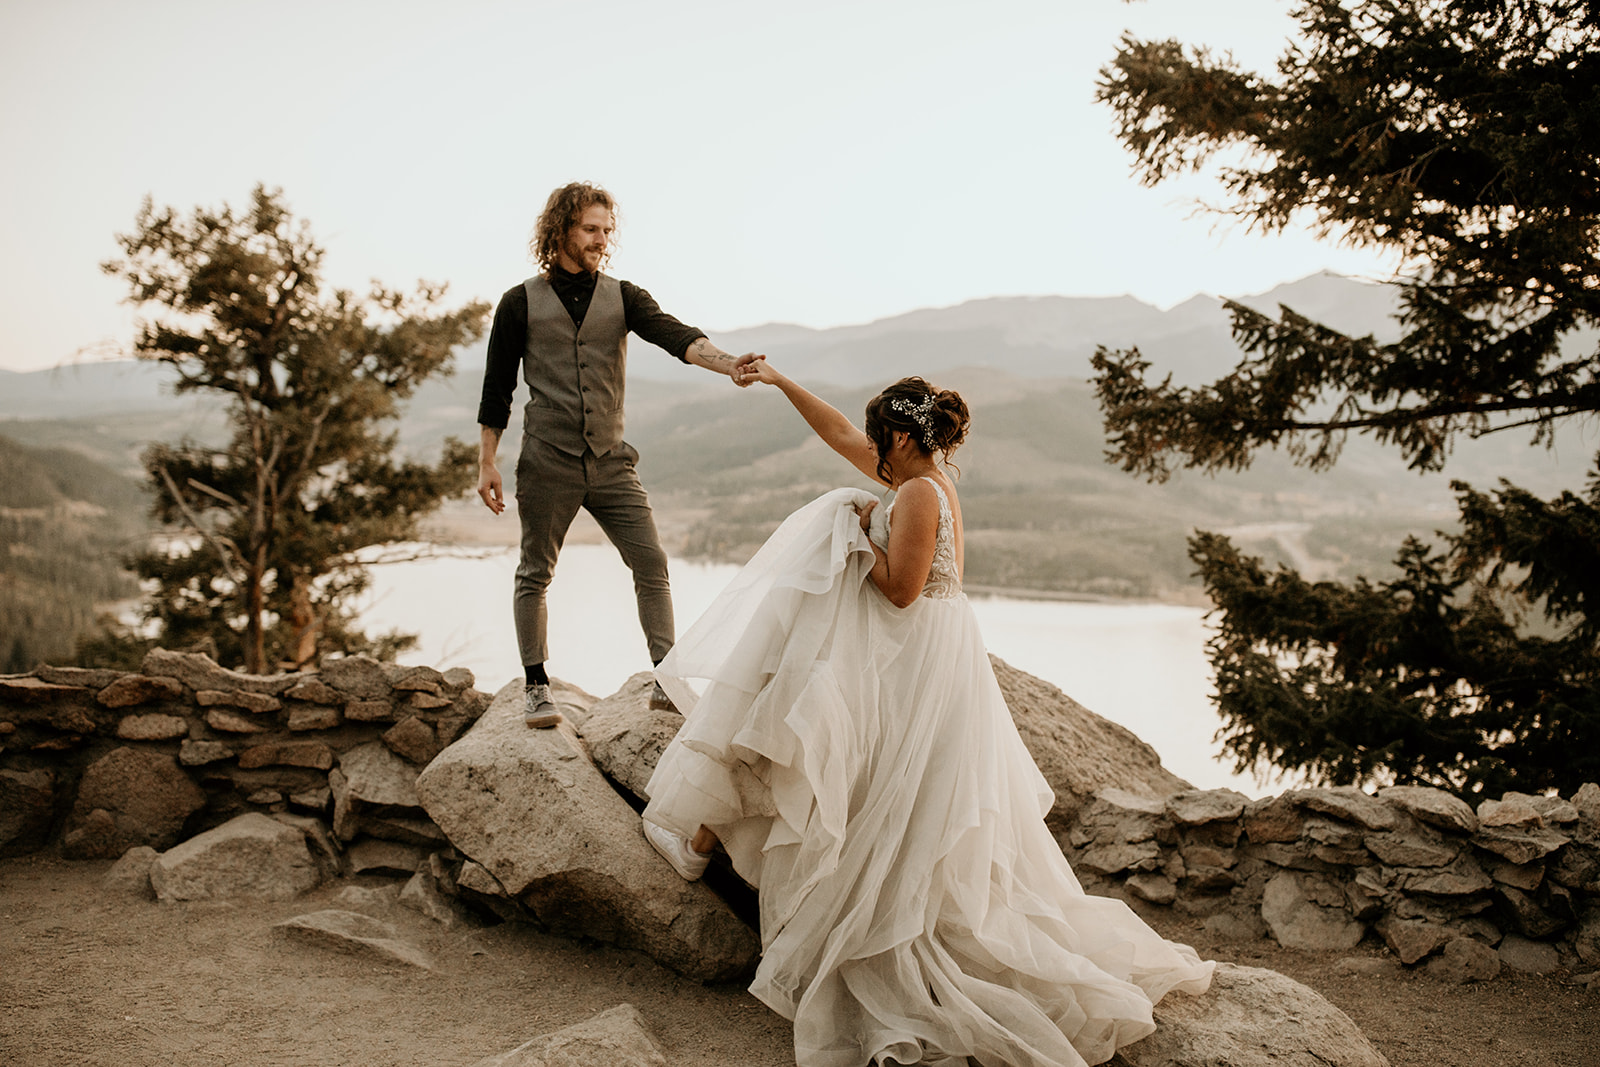 A groom reaches out to hold bride's hand as she steps up on a rock for their Adventurous Breckenridge Elopement photographed by Morgan Wirth Photography.